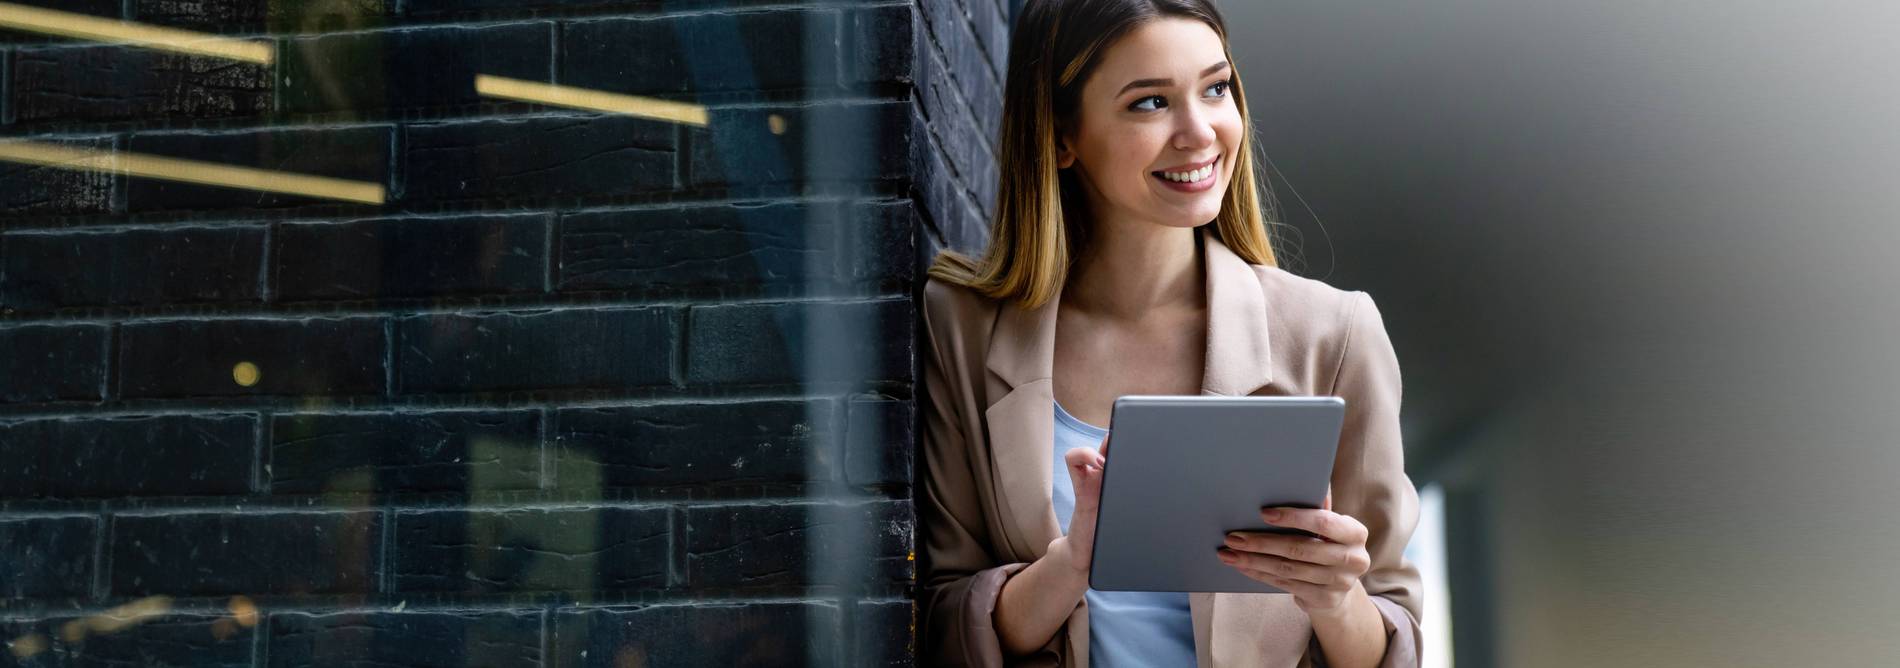 Woman happily checks her emails on the tablet